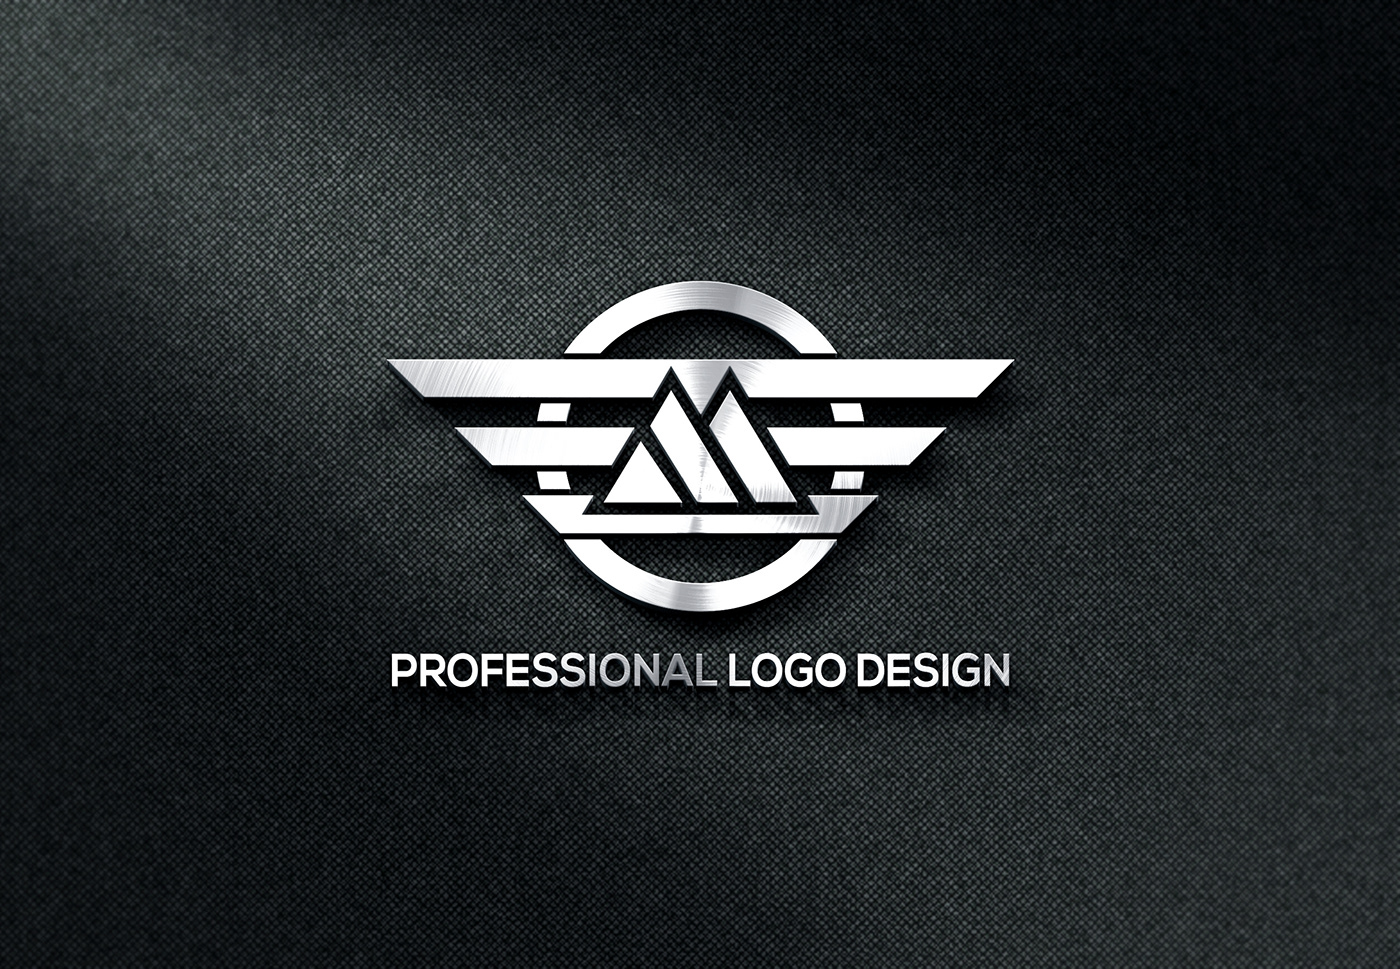 Free Download Professional Logo Template
